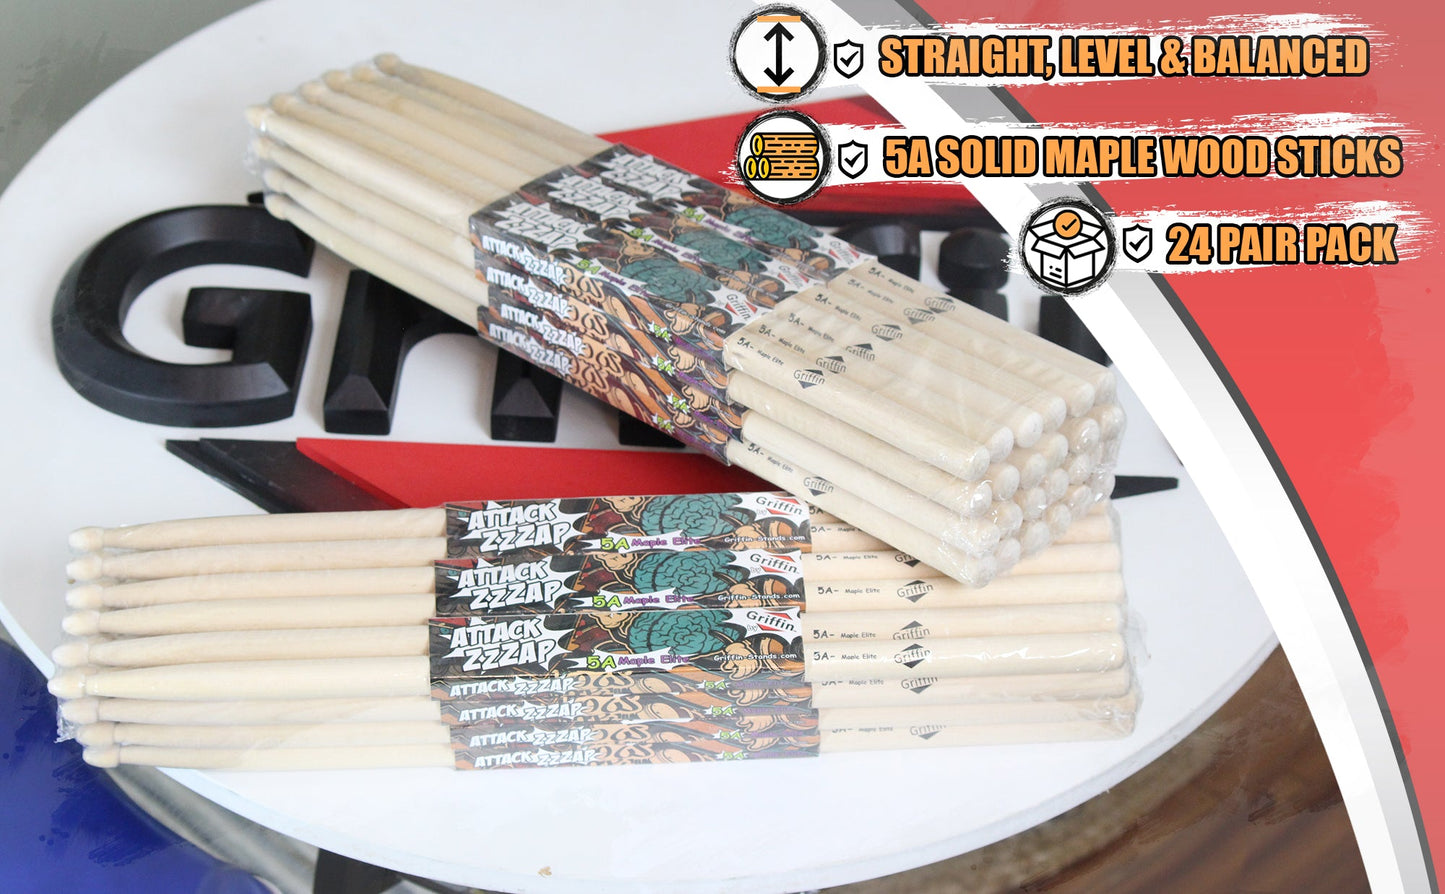 GRIFFIN Attack Zzzap Drum Sticks - 24 Pairs of Select Elite Maple Wood Size 5A - Drummers Percussion Classic Pure Grit Uncoated, Raw Wood Drumming Sticks